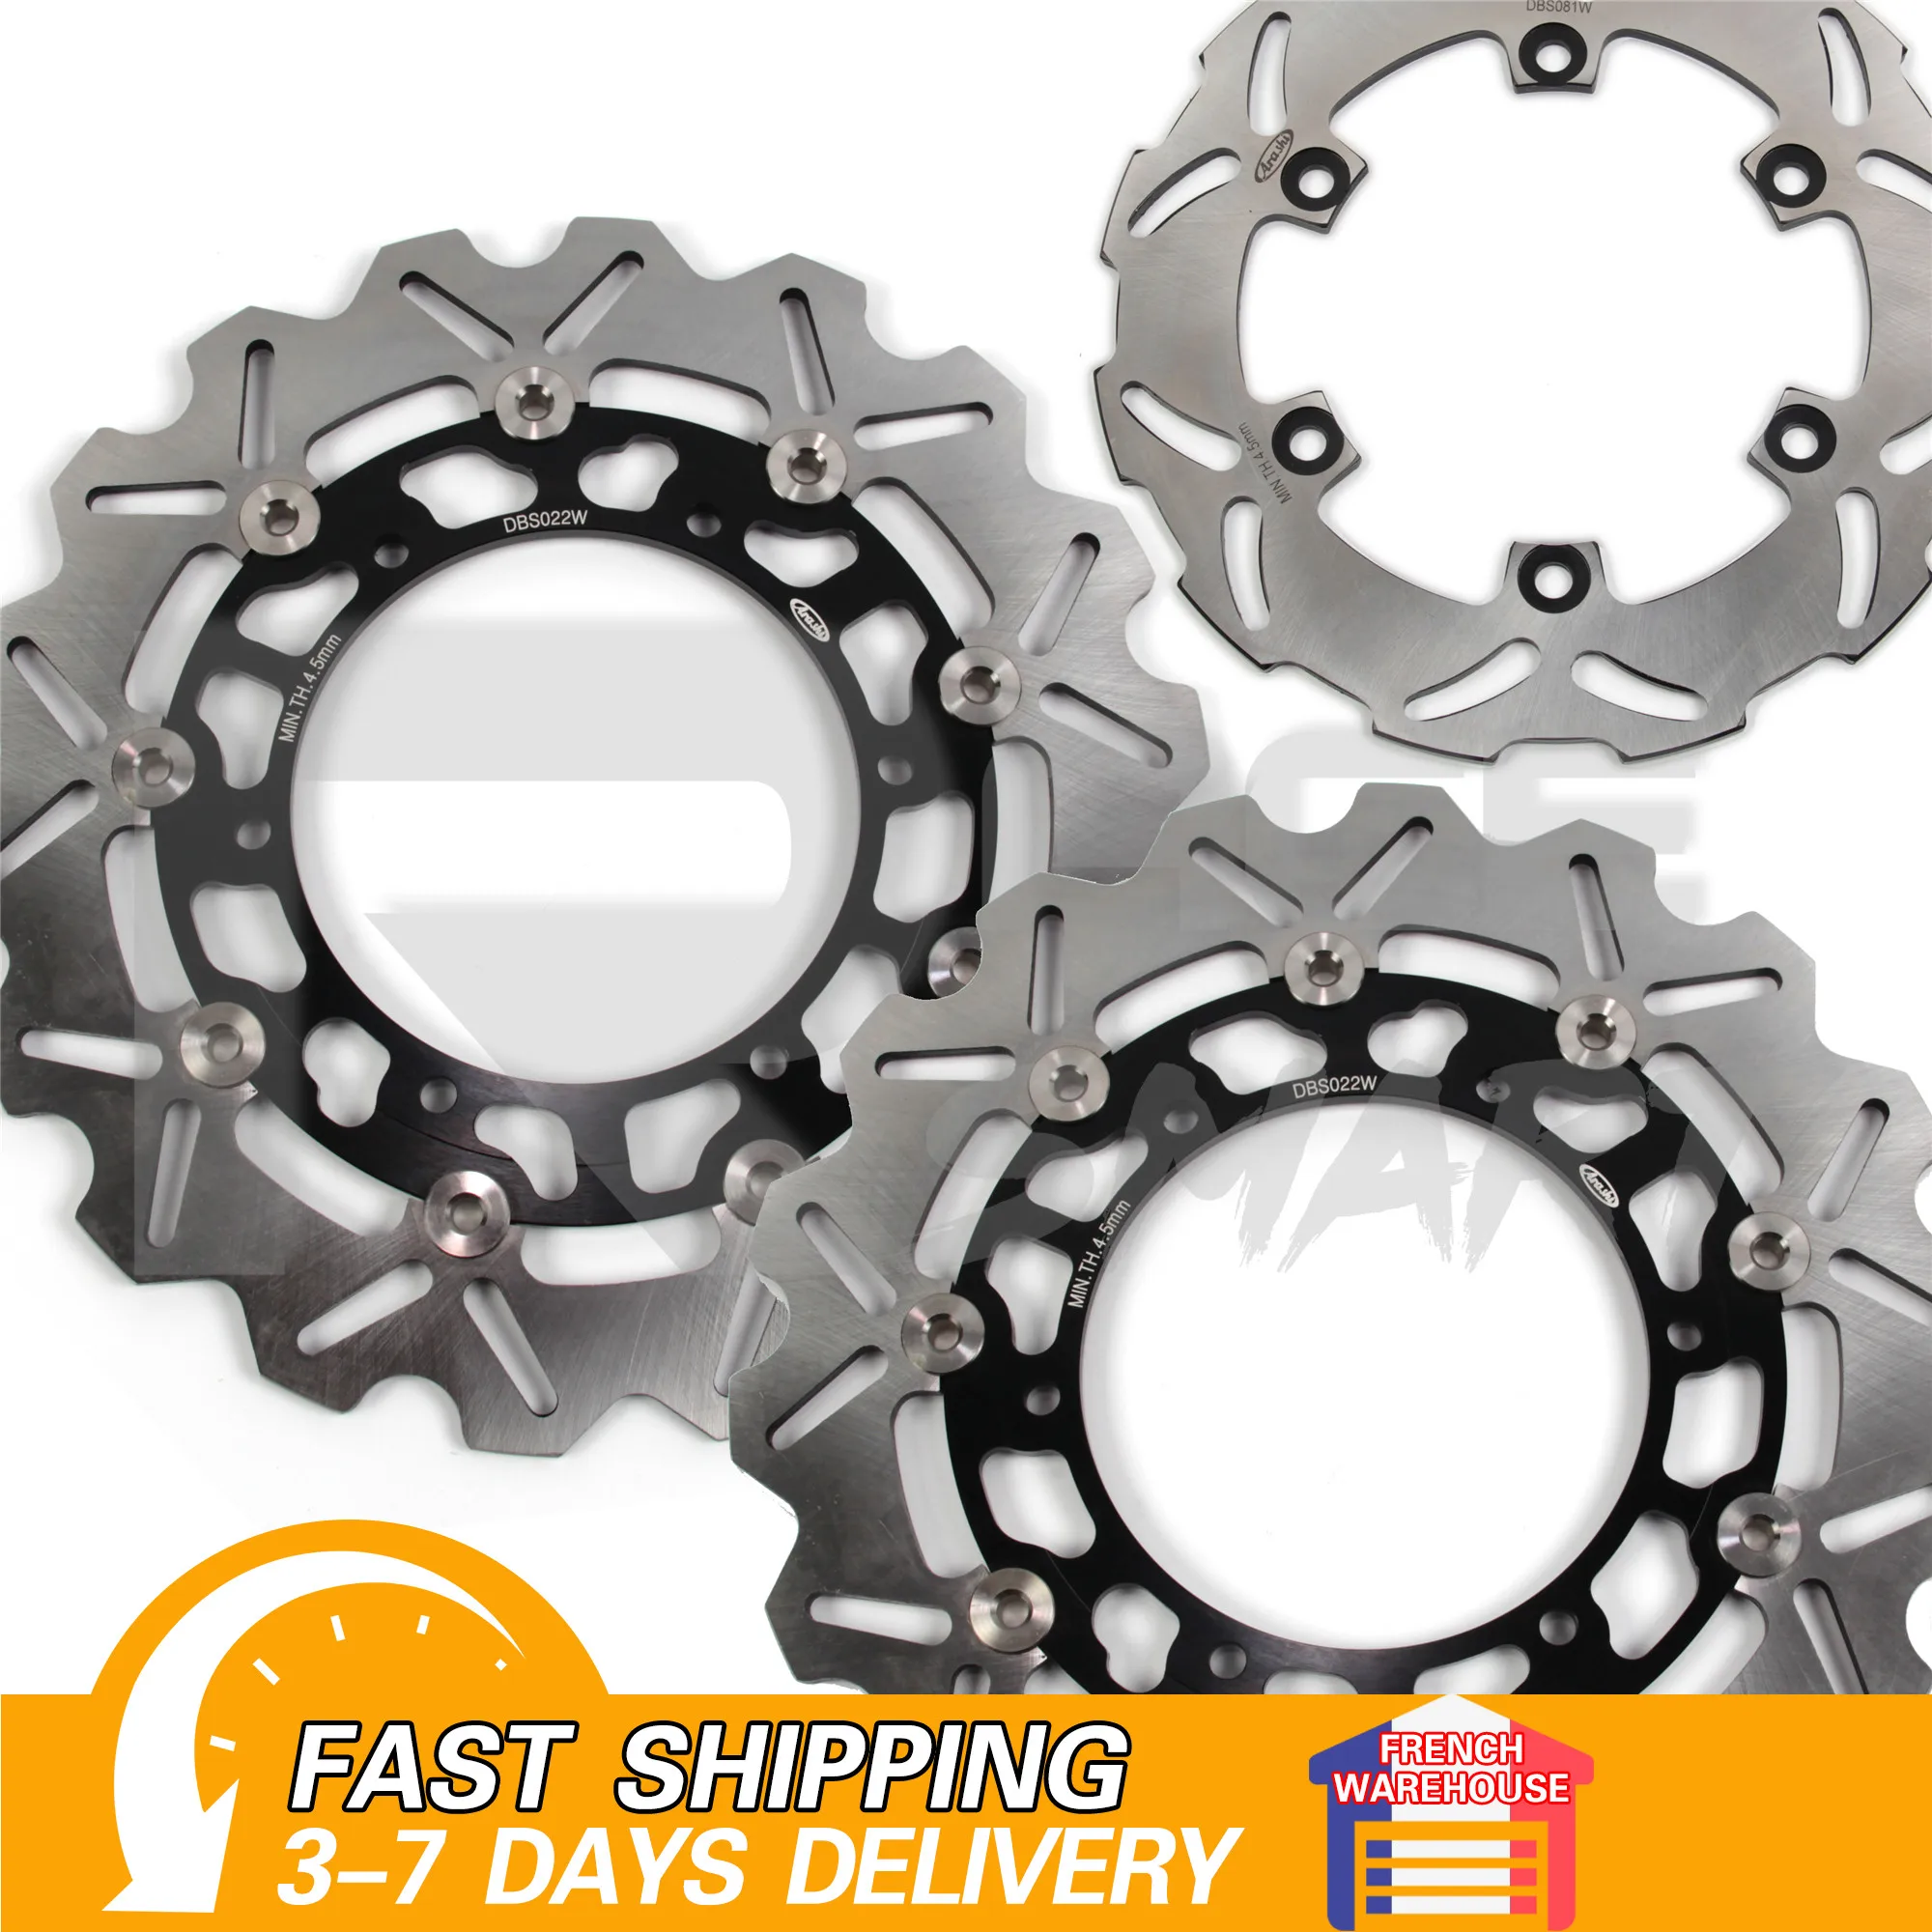 

FZS1000 FAZER 2001-2005 Motorcycle CNC Floating Front Rear Brake Disk Discs Rotors For YAMAHA XJR 1300 XJR1300 1999-2017 2000